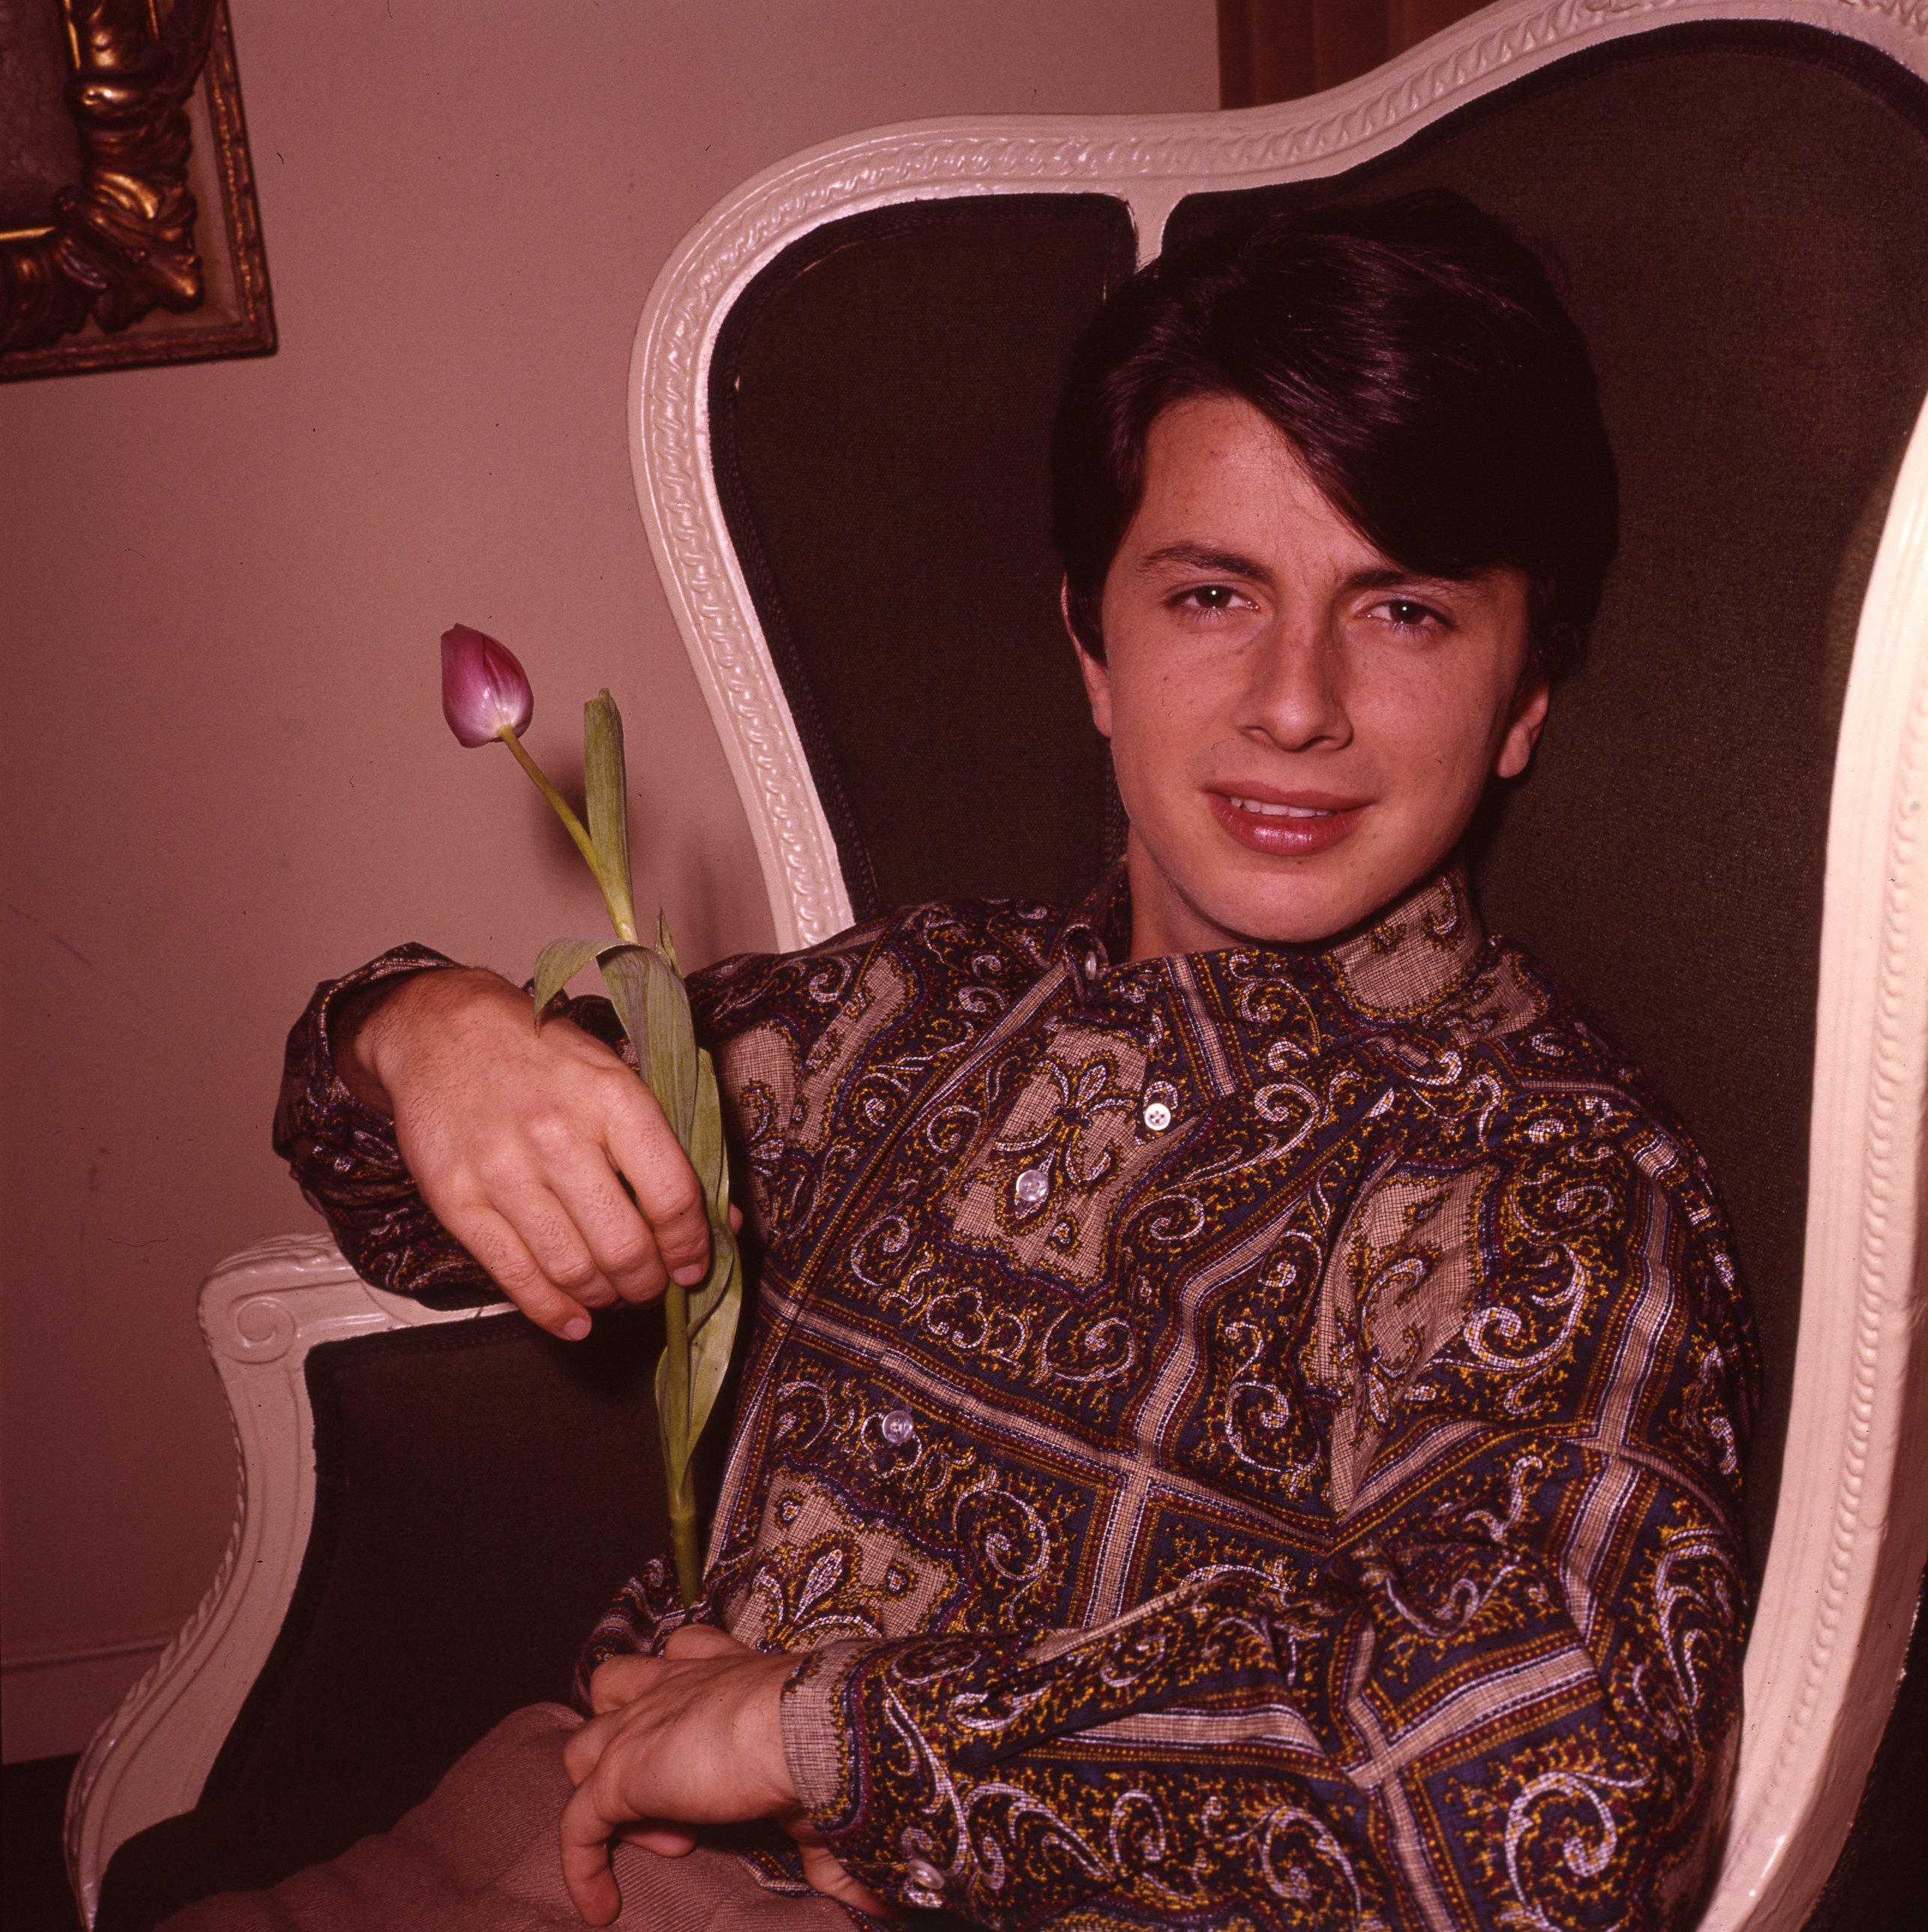 French pop singer Hervé Vilard, picture with tulip, Hamburg, Germany, circa 1967. І Sources: Getty Images